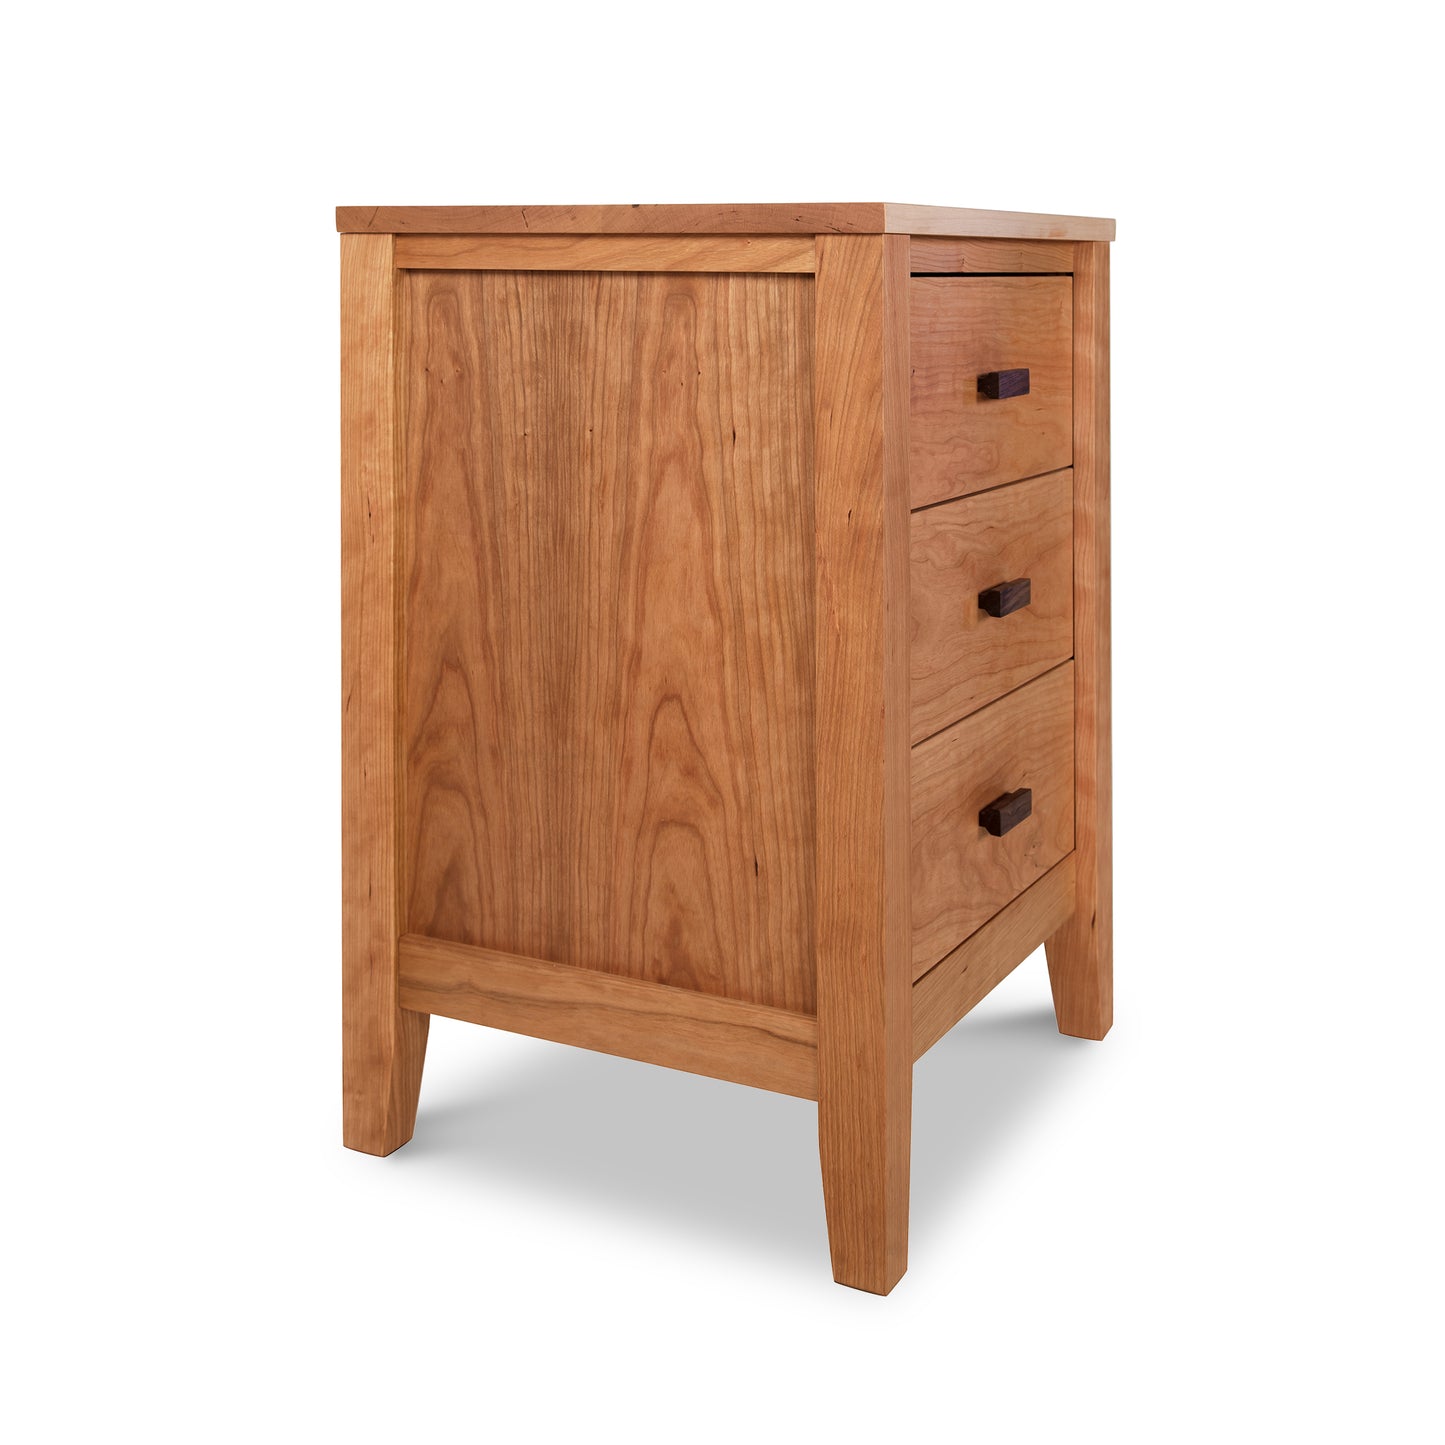 An Andover Modern 3-Drawer Nightstand handcrafted in Vermont by Maple Corner Woodworks with three drawers.